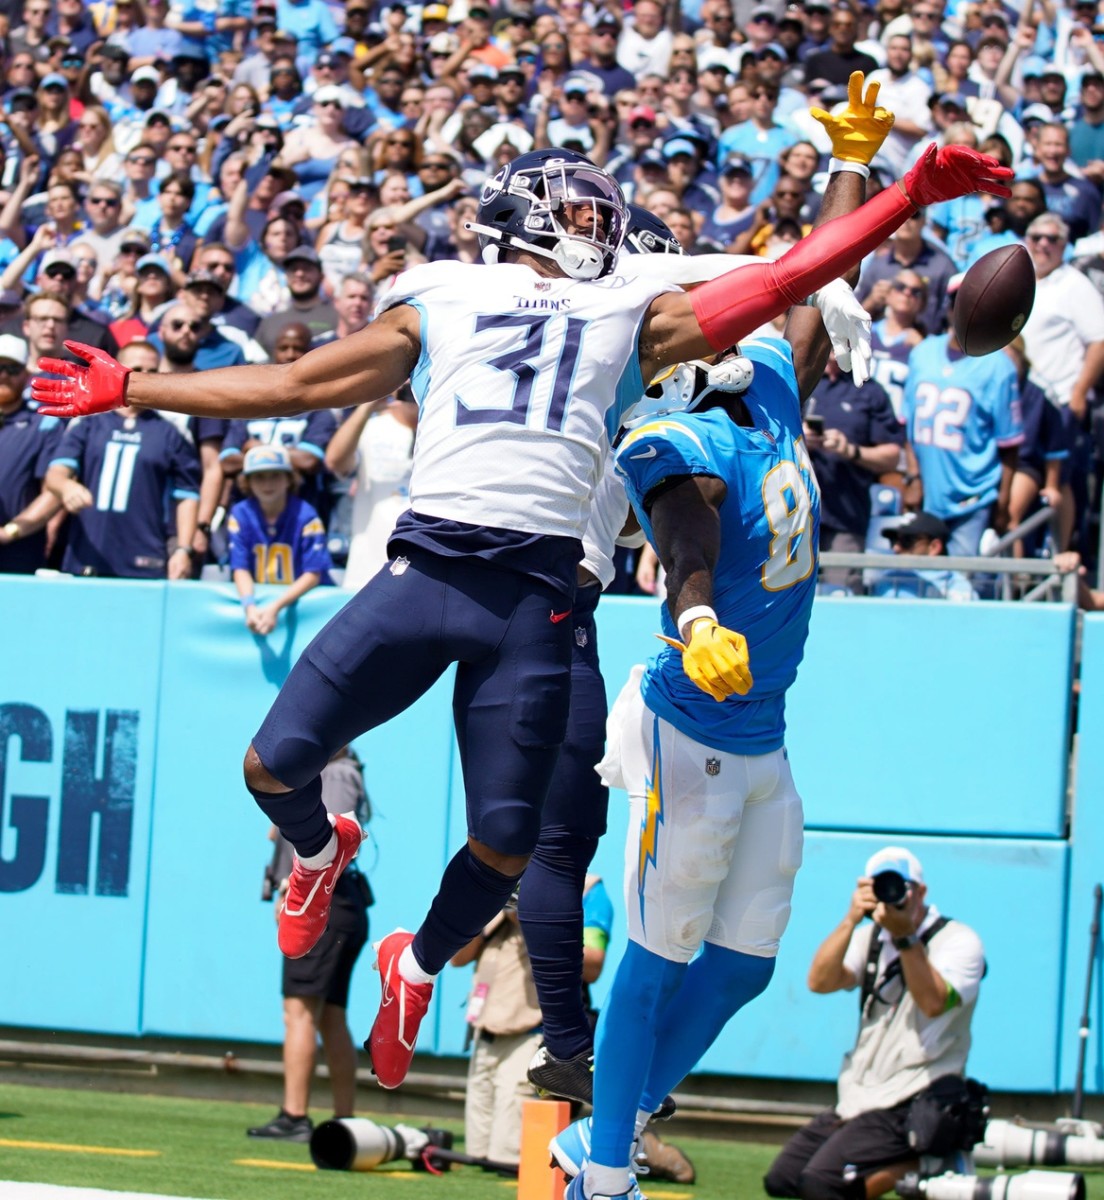 Kevin Byard (31) breaks up a pass in the end zone intended for Los Angeles Chargers wide receiver Mike Williams (81).